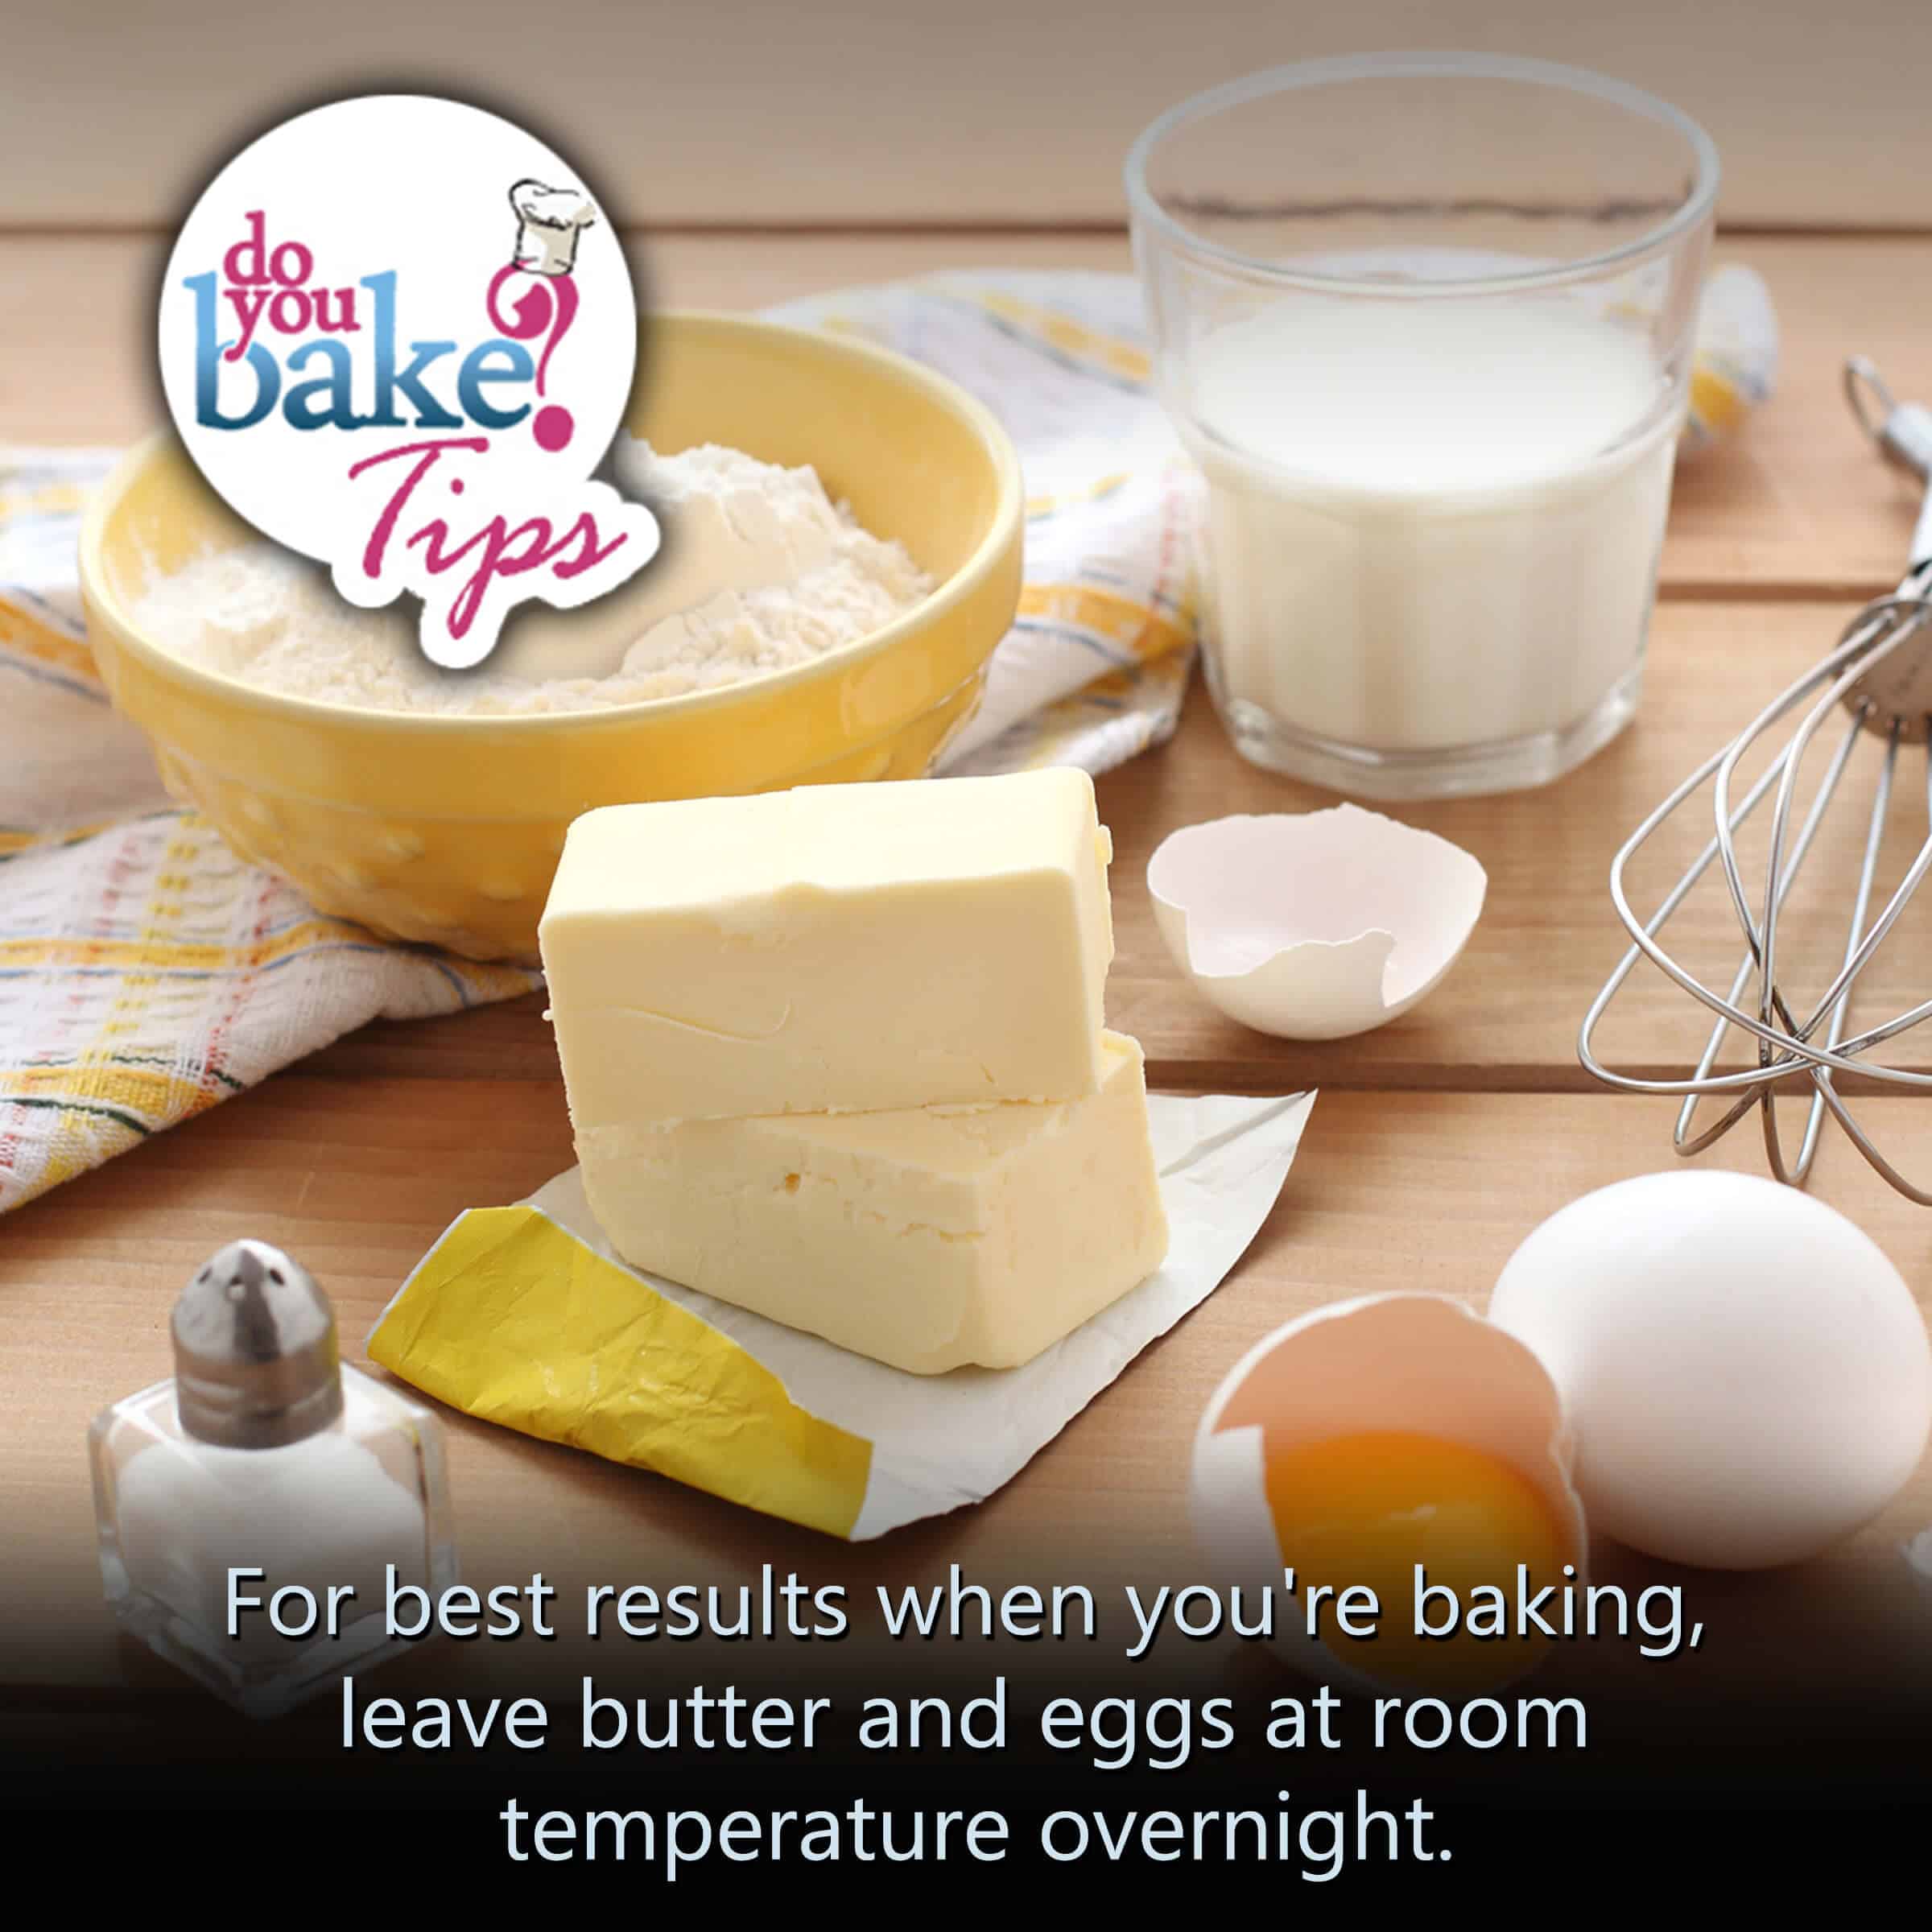 Butter and eggs â Do You Bake